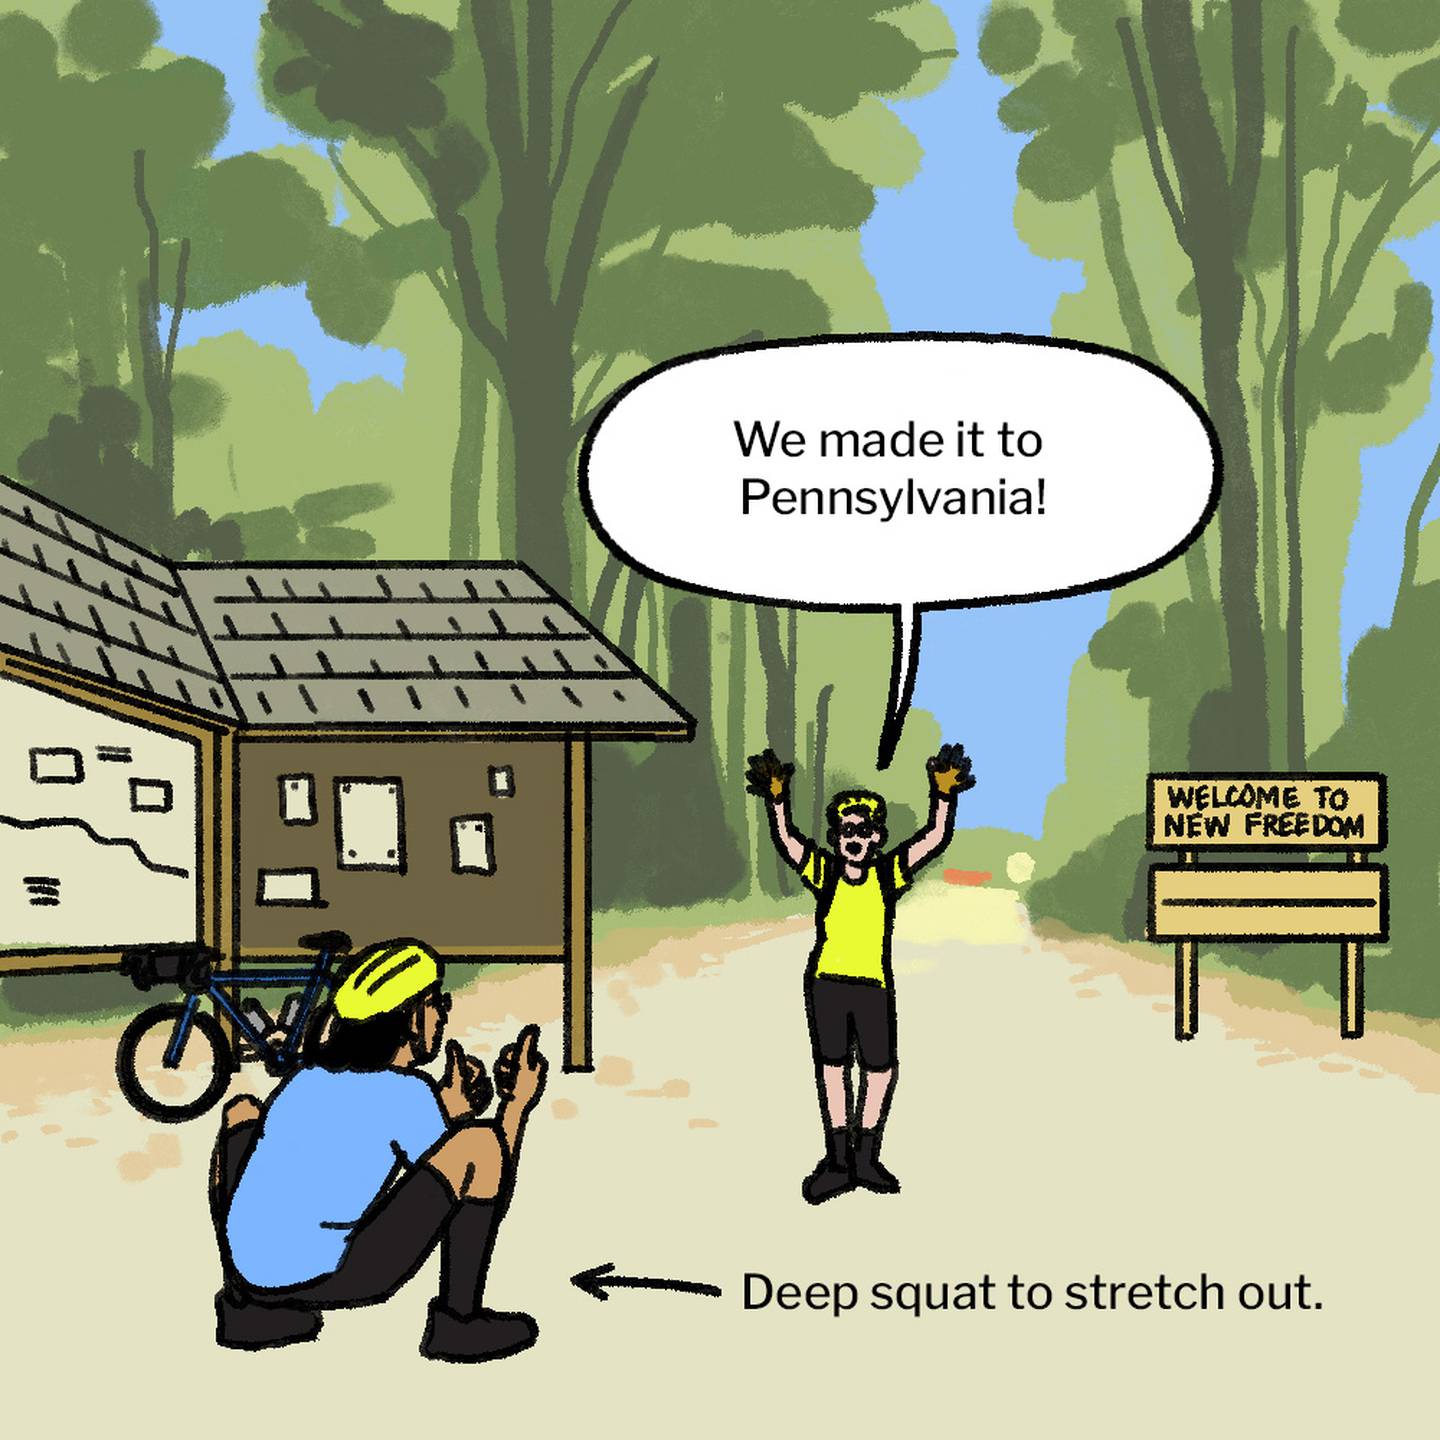 Illustration of man and woman with helmets on the trail, with a roofed information stand on the left and a wooden sign on the right that says "Welcome to New Freedom." The woman lifts her hands in the air and shouts "We made it to Pennsylvania!" The man squats and gives her two thumbs-up.